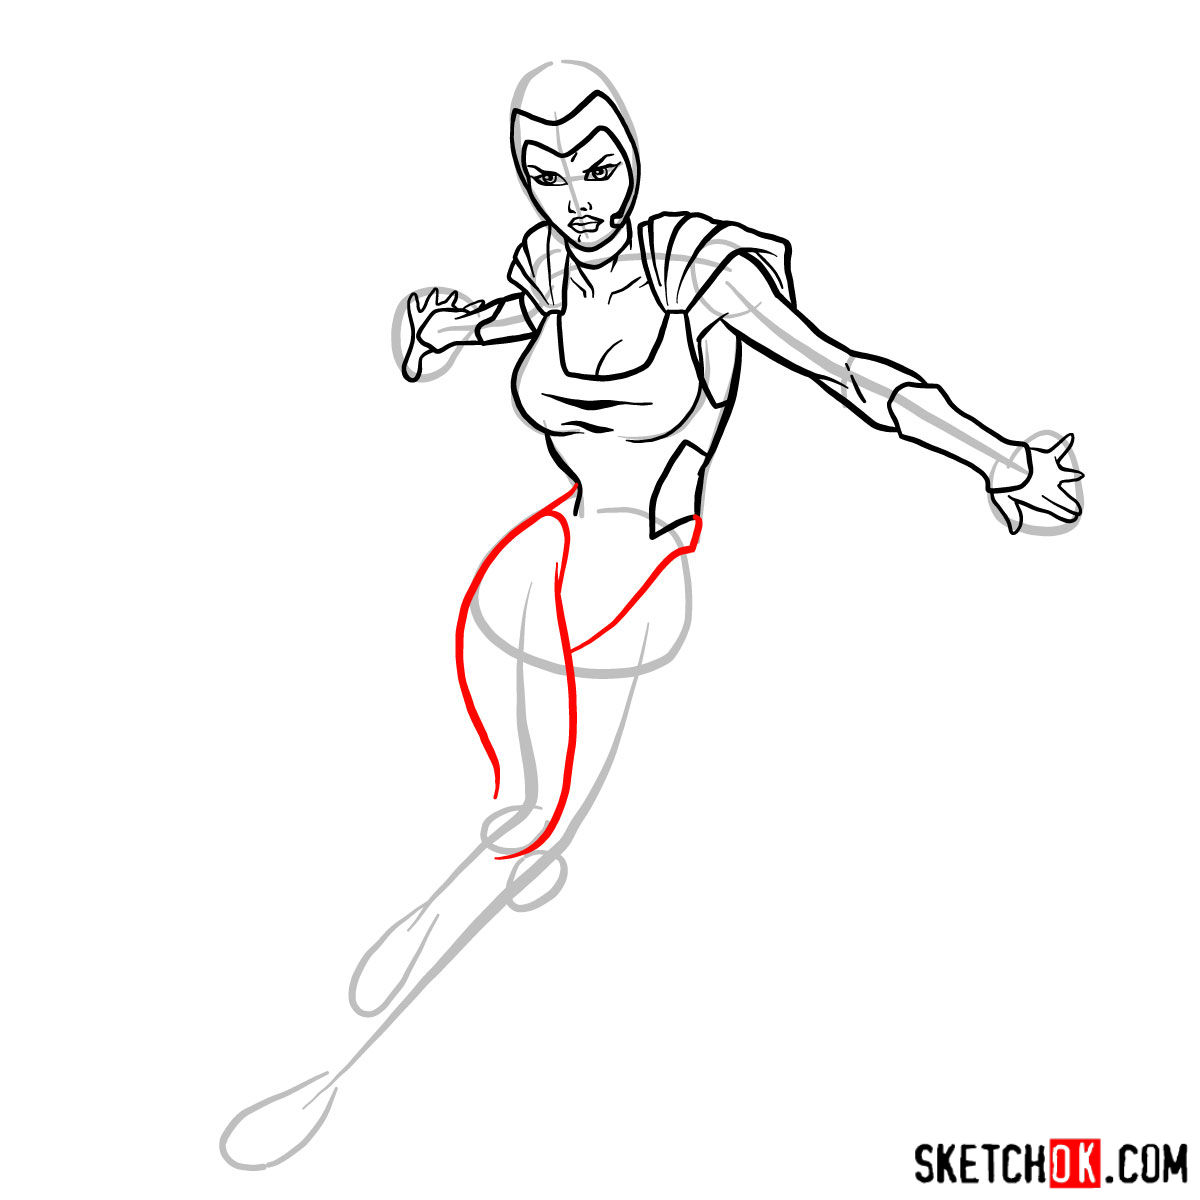 How to draw Polaris mutant from X-Men - step 09